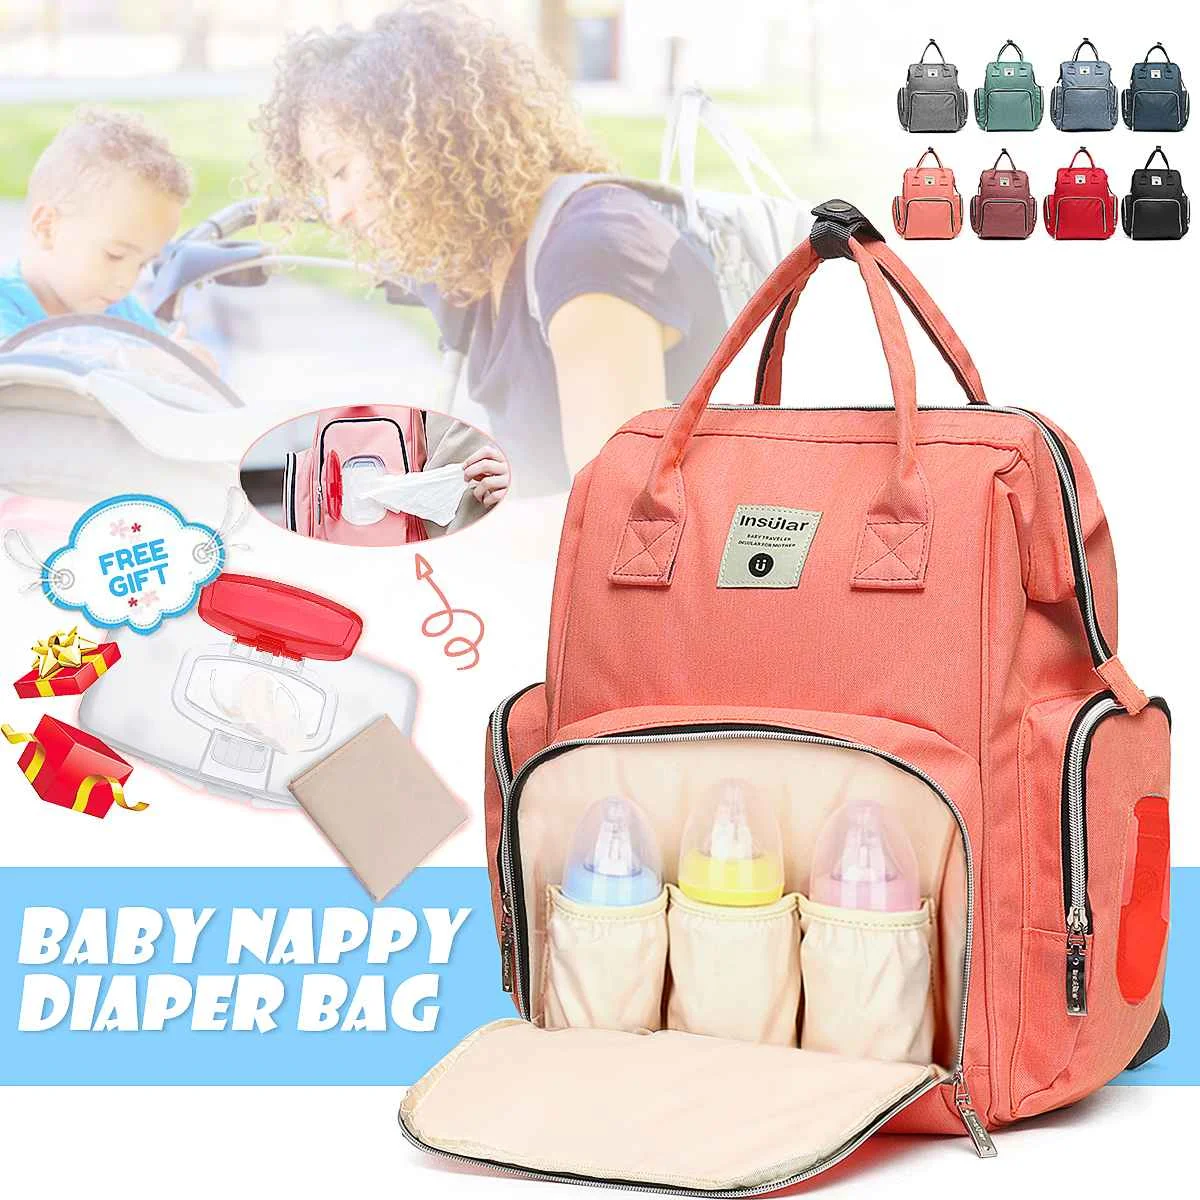 

Baby Nappy Bag Diaper Bags Backpack Travel Fashion Large Capacity Stroller Bag Multi-function Rucksack Mummy Bag Baby Changing